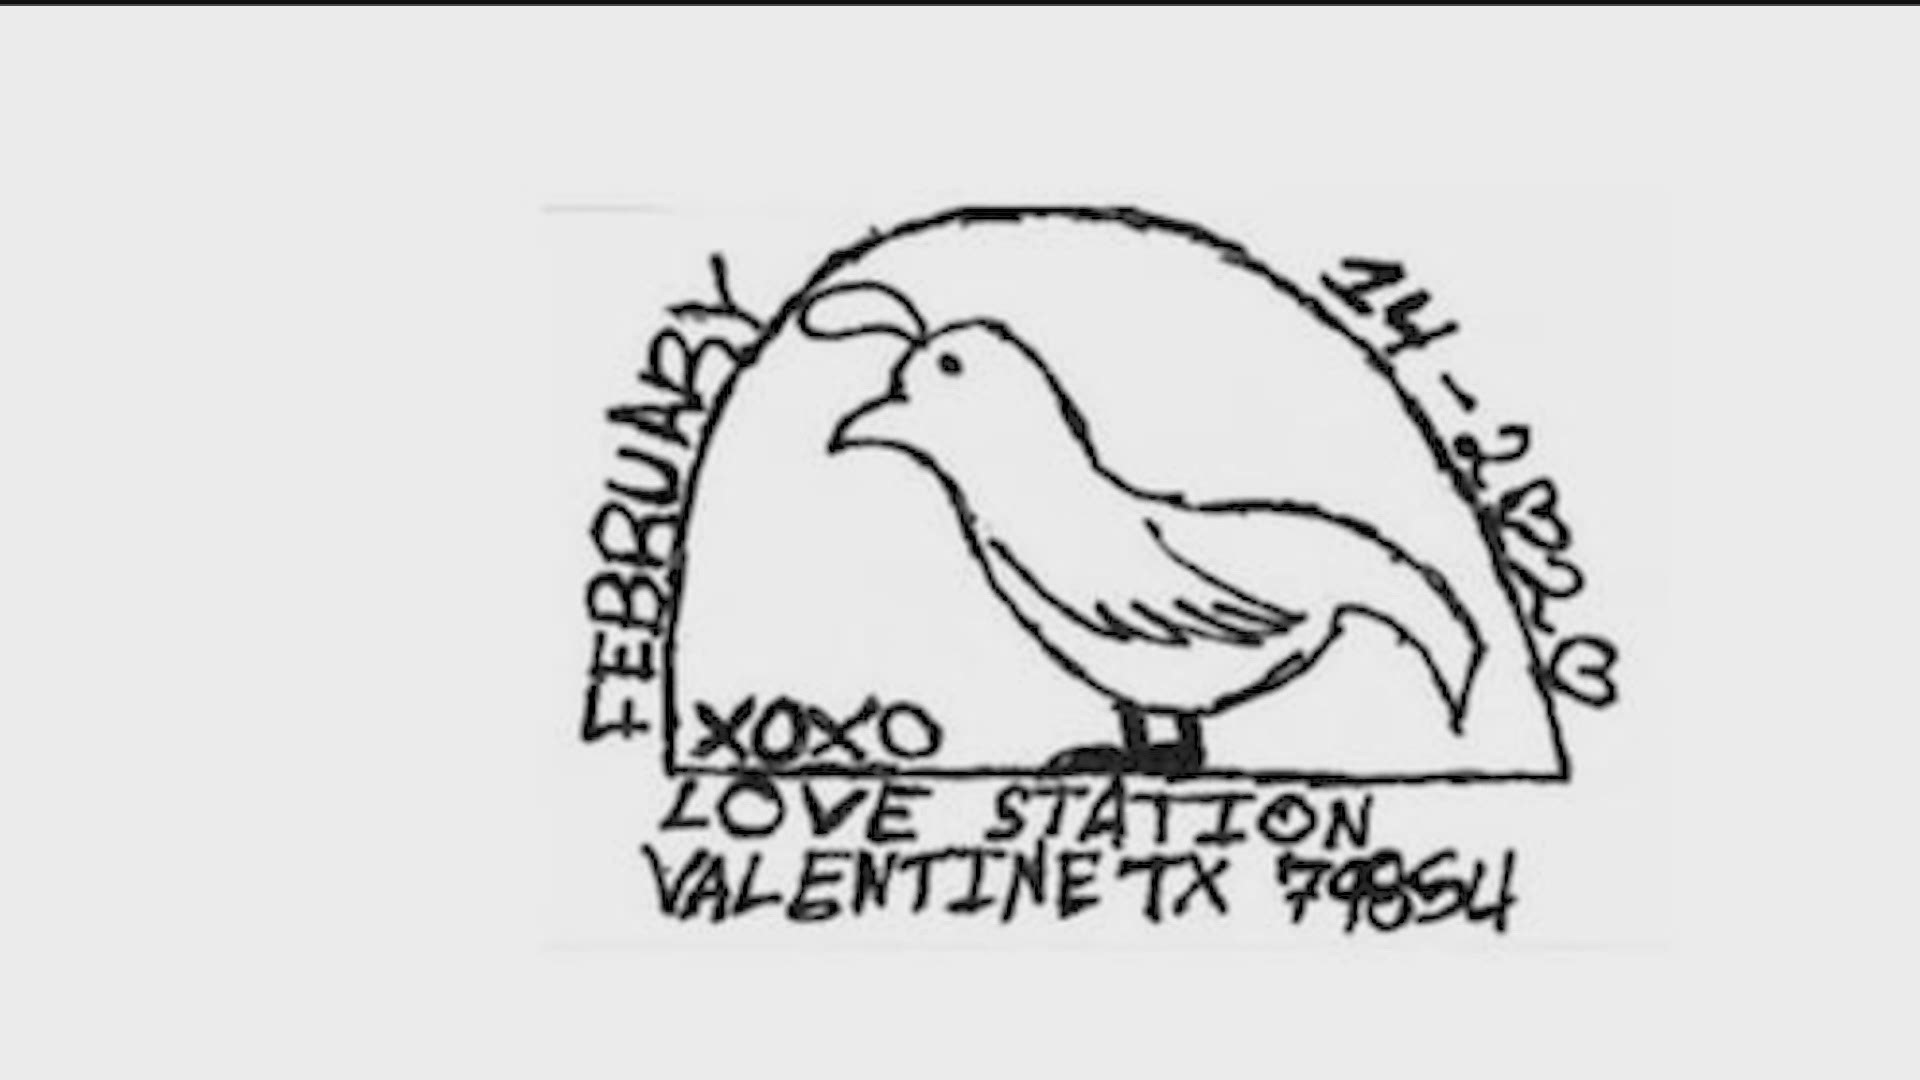 For over 30 years, Valentine, Texas has provided a special Valentine postmark you can add to letters to that special person in your life.